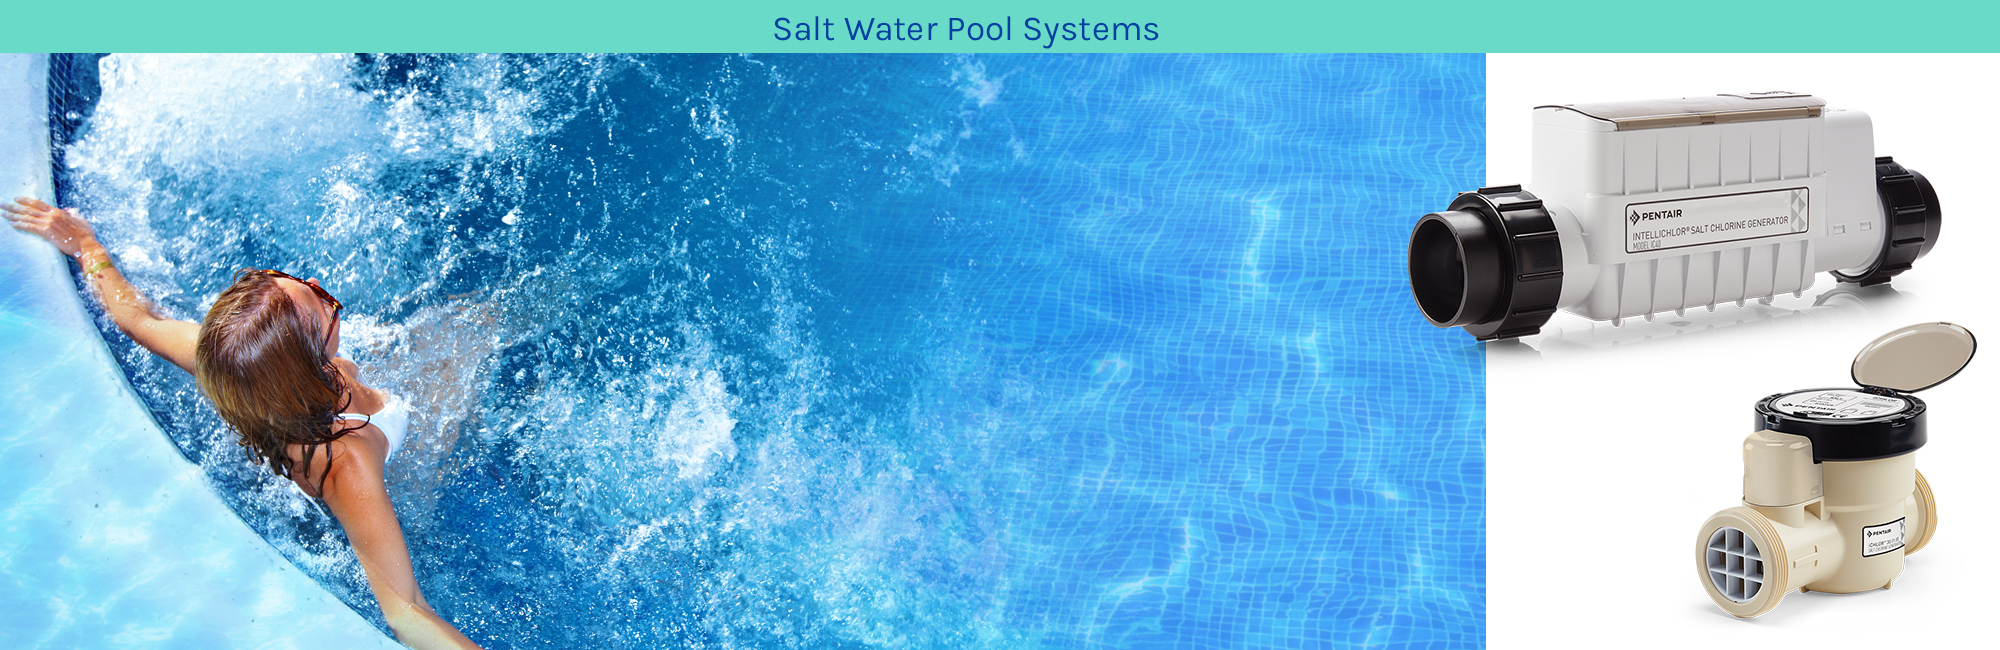 Saltwater Pool Systems